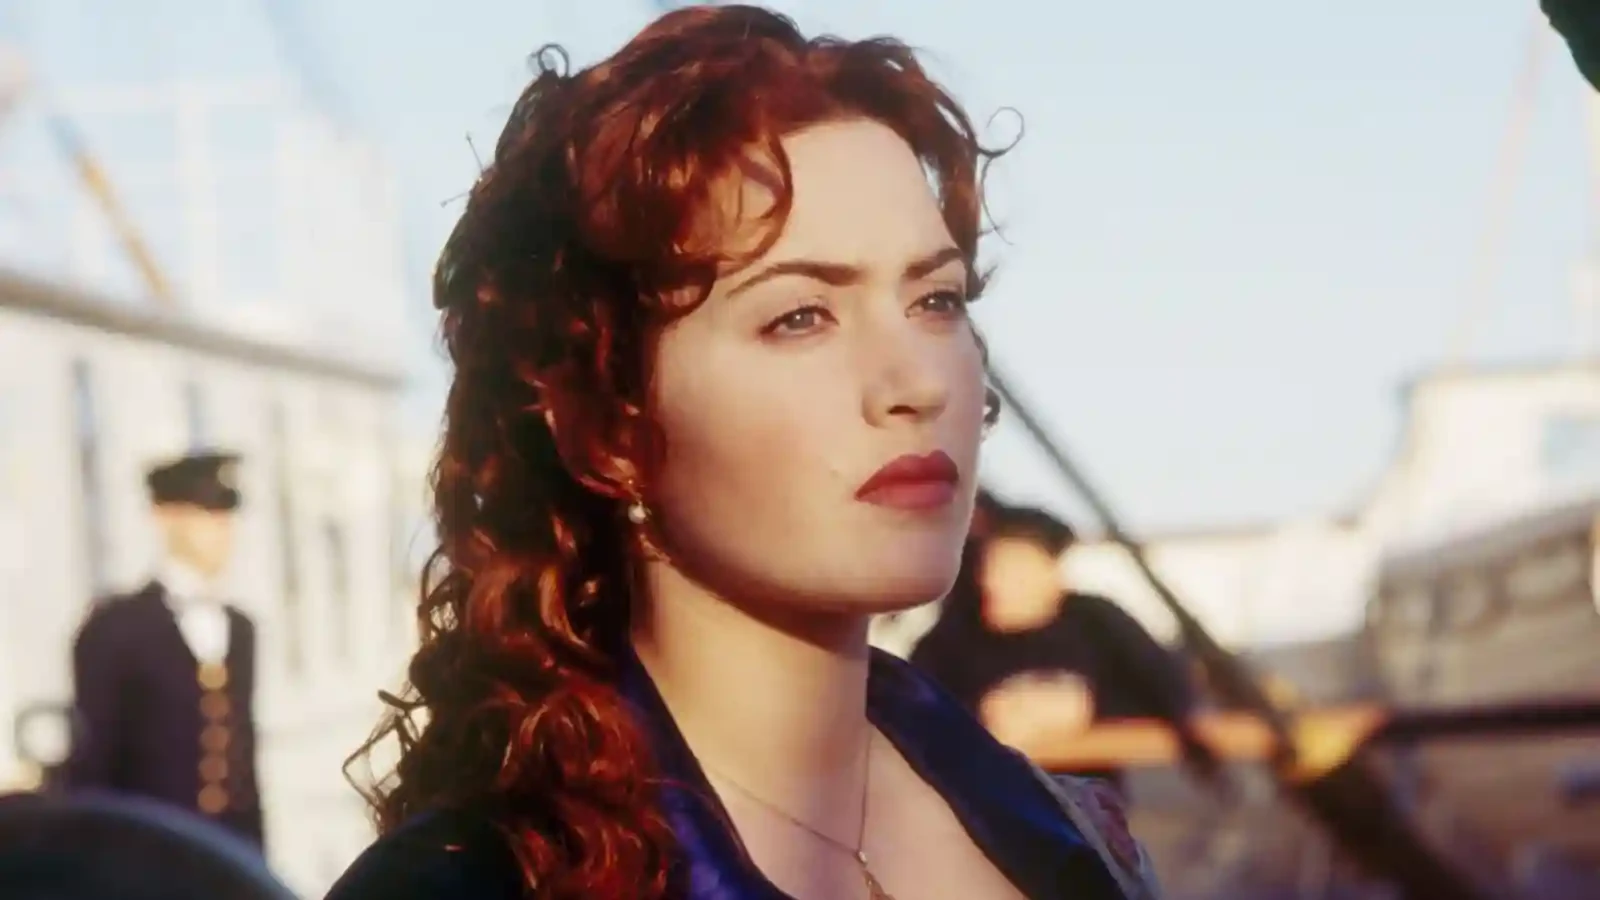 Kate Winslet struggled with fame after becoming a star overnight